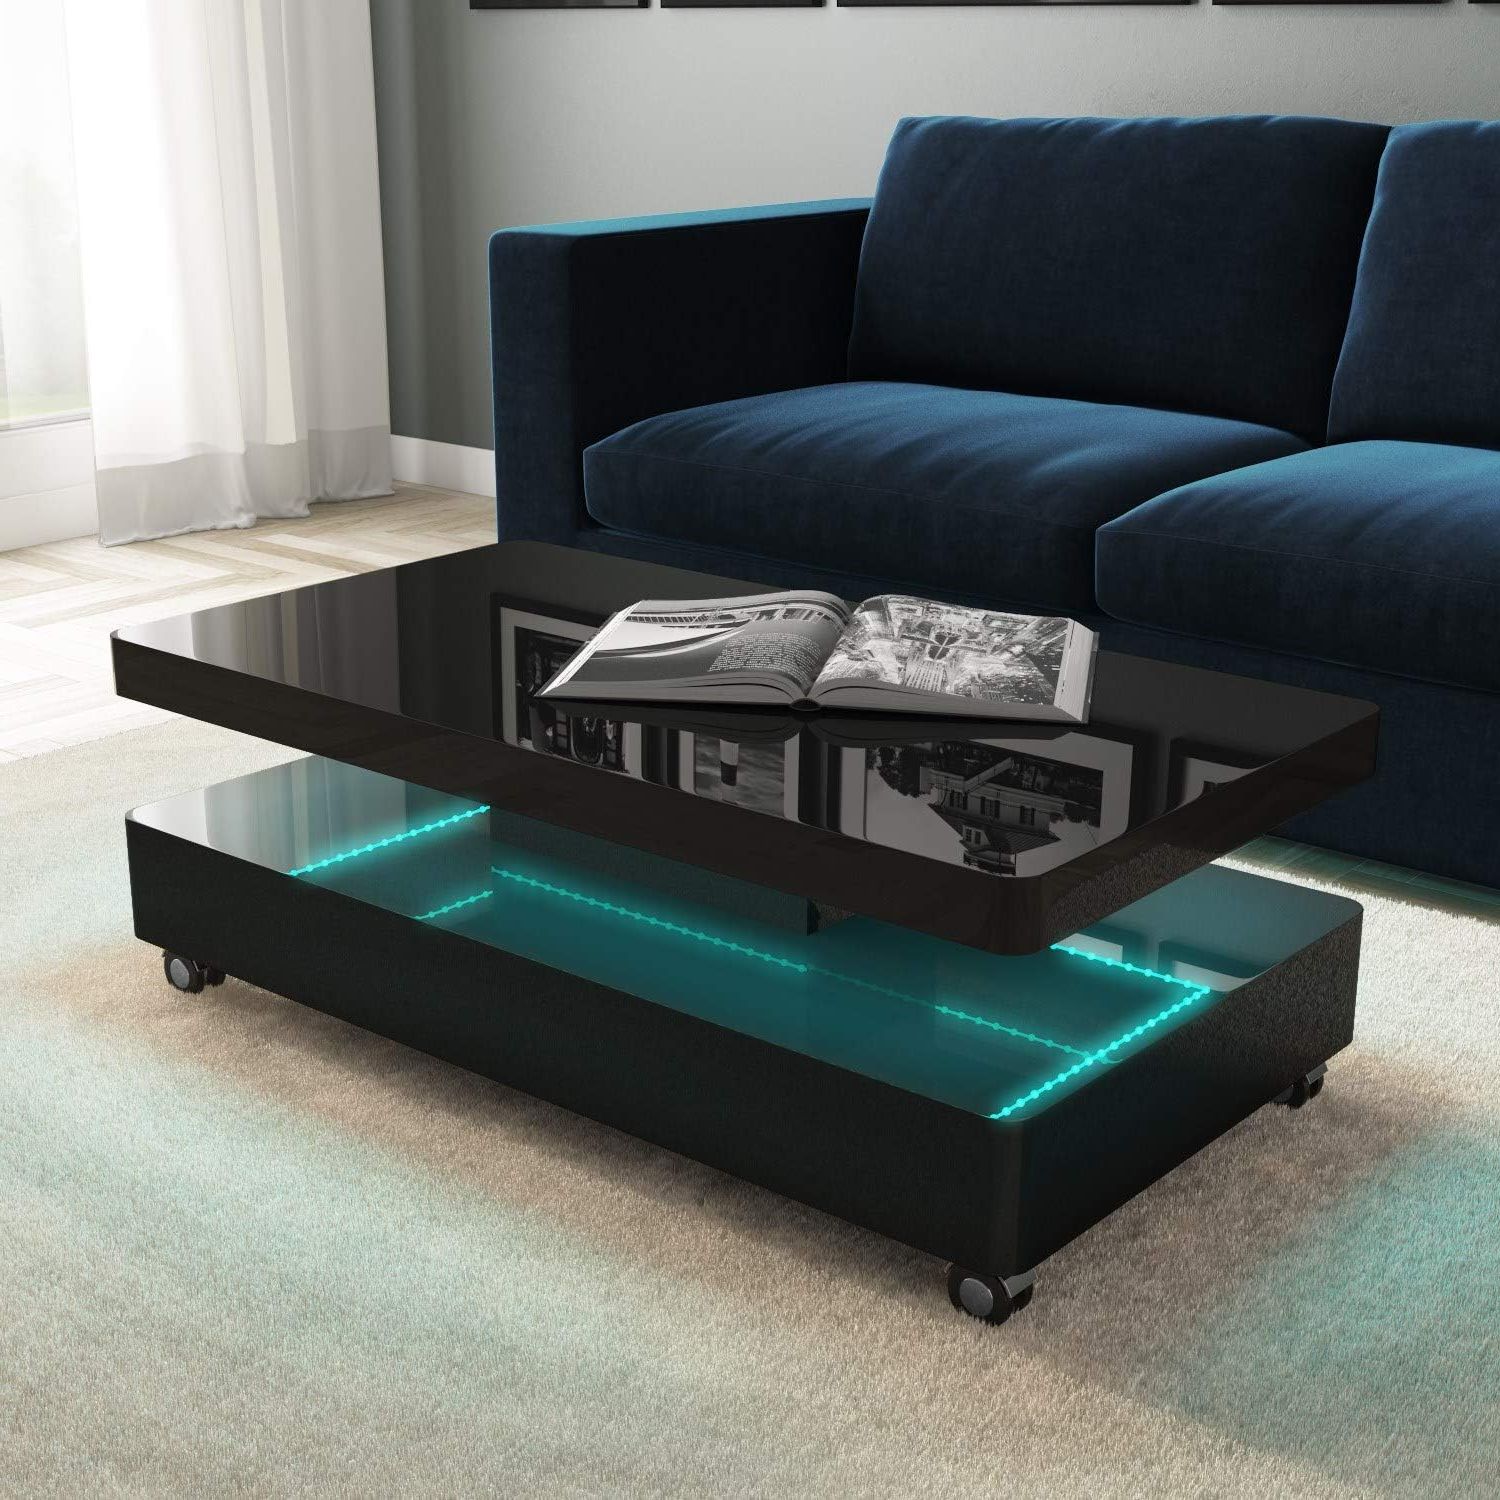 Tiffany Rectangular Coffee Table In Black Gloss: Amazon.co (View 5 of 15)